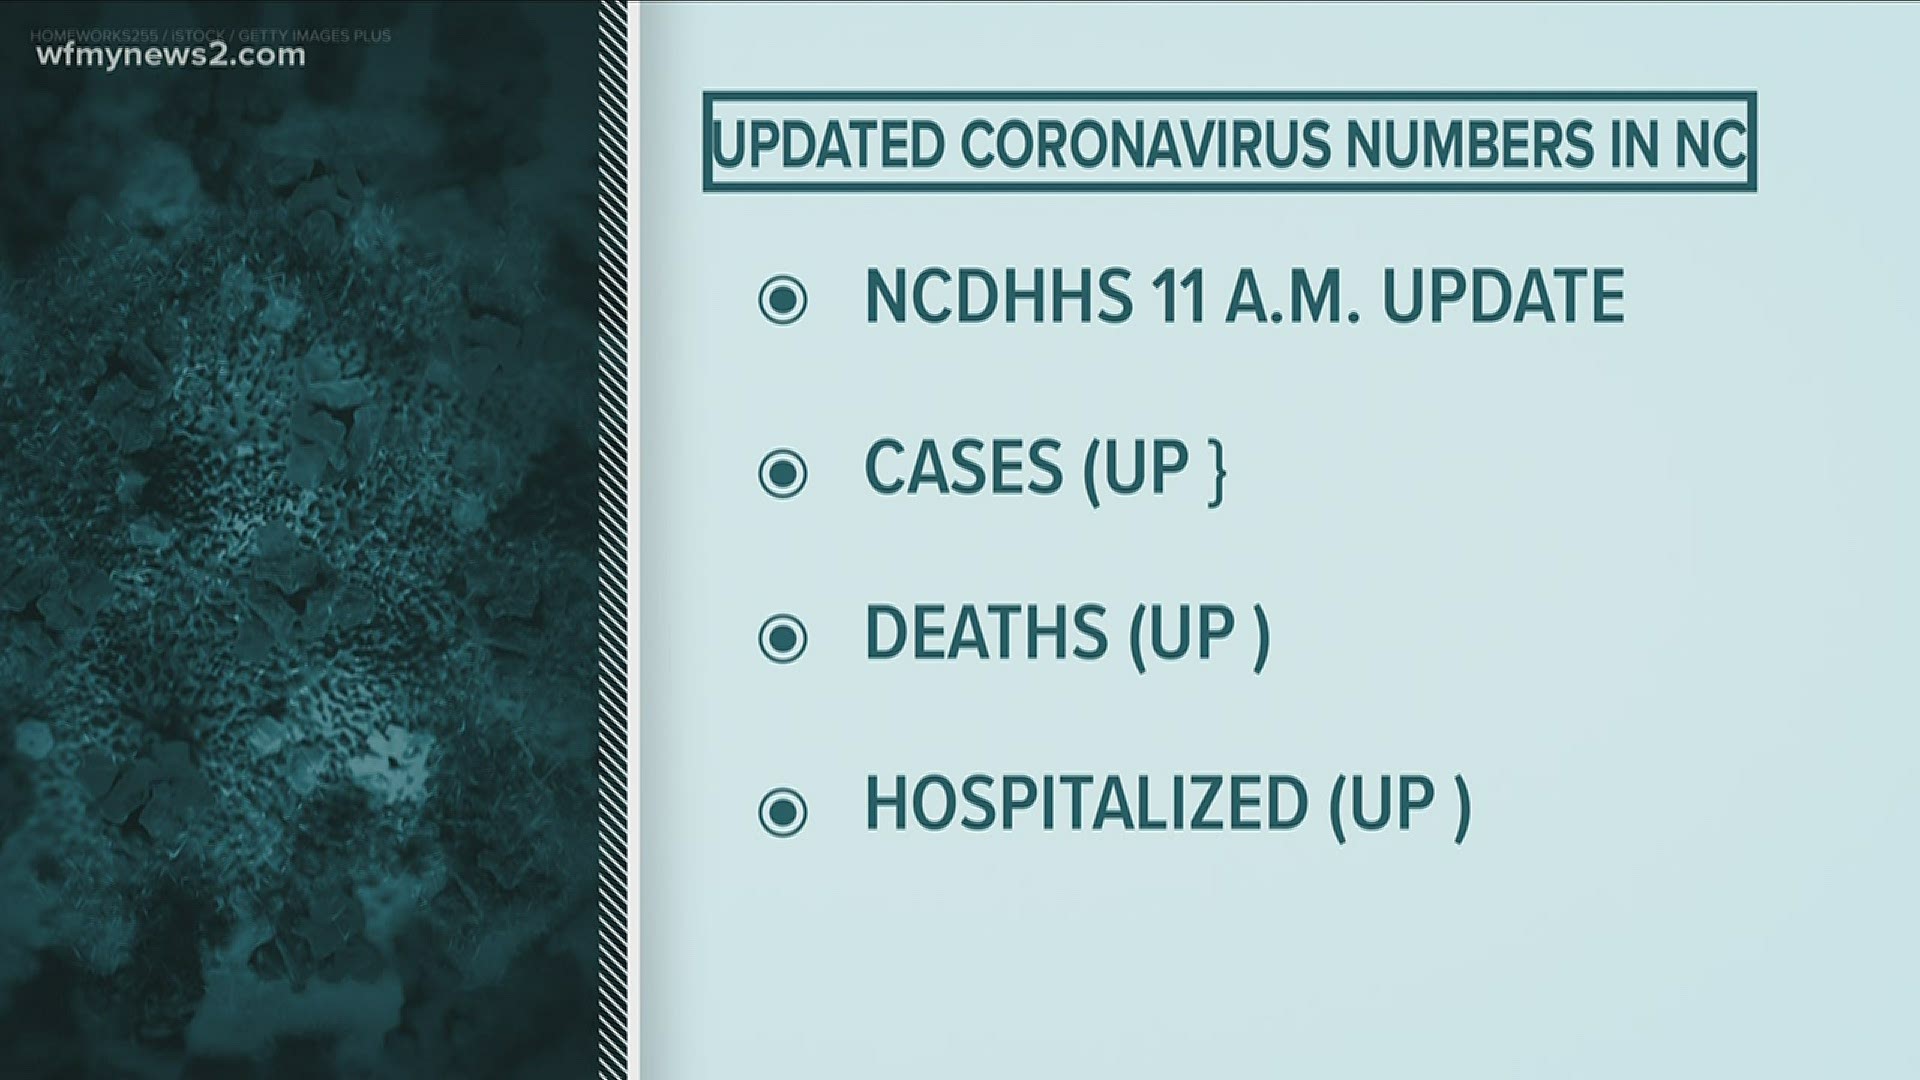 The NC DHHS COVID-19 update for Tuesday, May 19 shows at least 422 new cases – the lowest daily case increase in a week. However, 21 more people died since Monday.